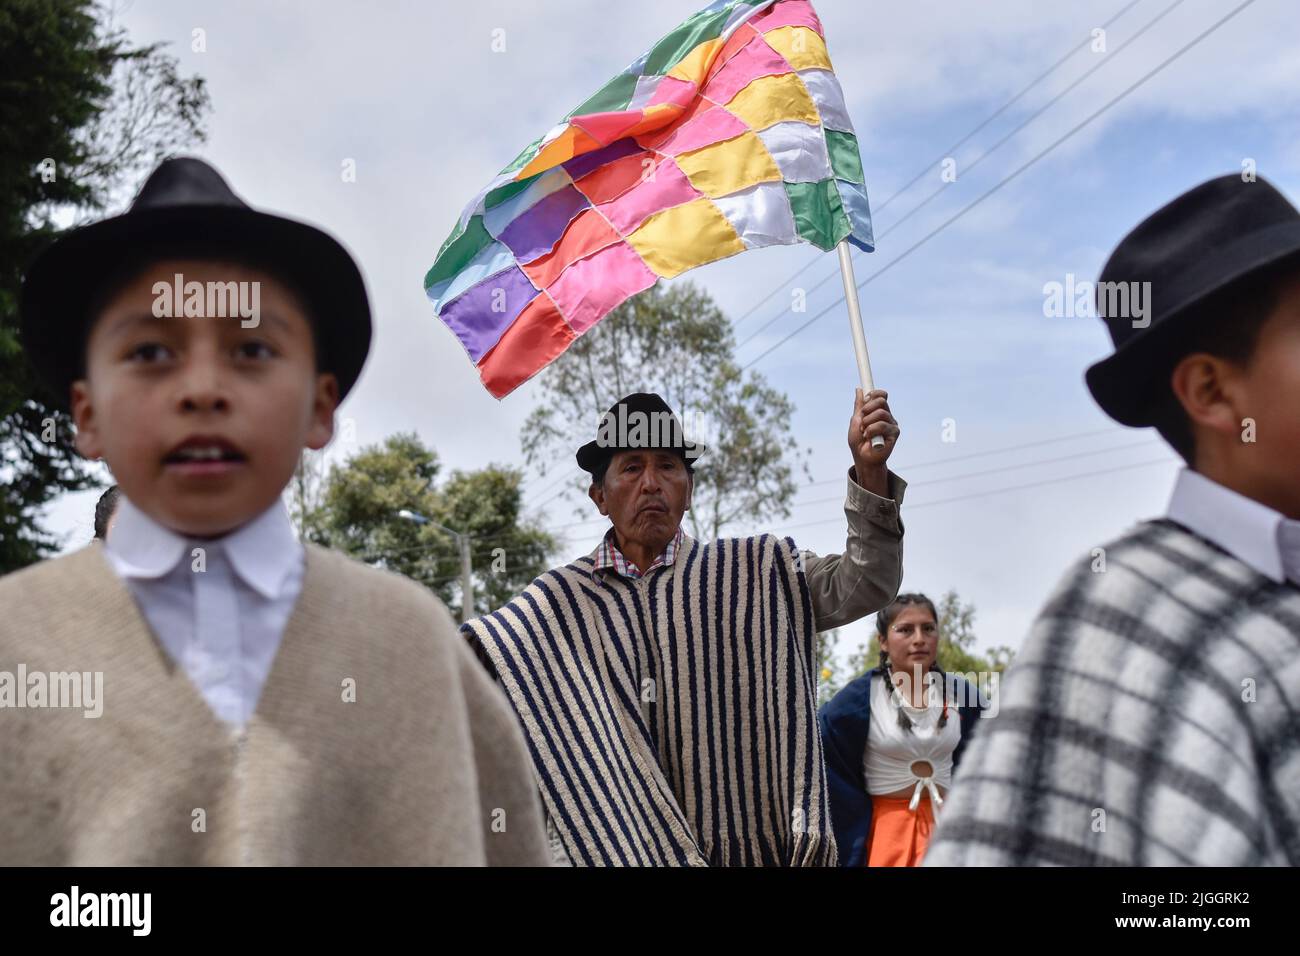 Different indigenous communities from southwestern Colombia gathered to celebrate the festival of the sun 'inti Raymi' in Ipiales, Narino - Colombia o Stock Photo